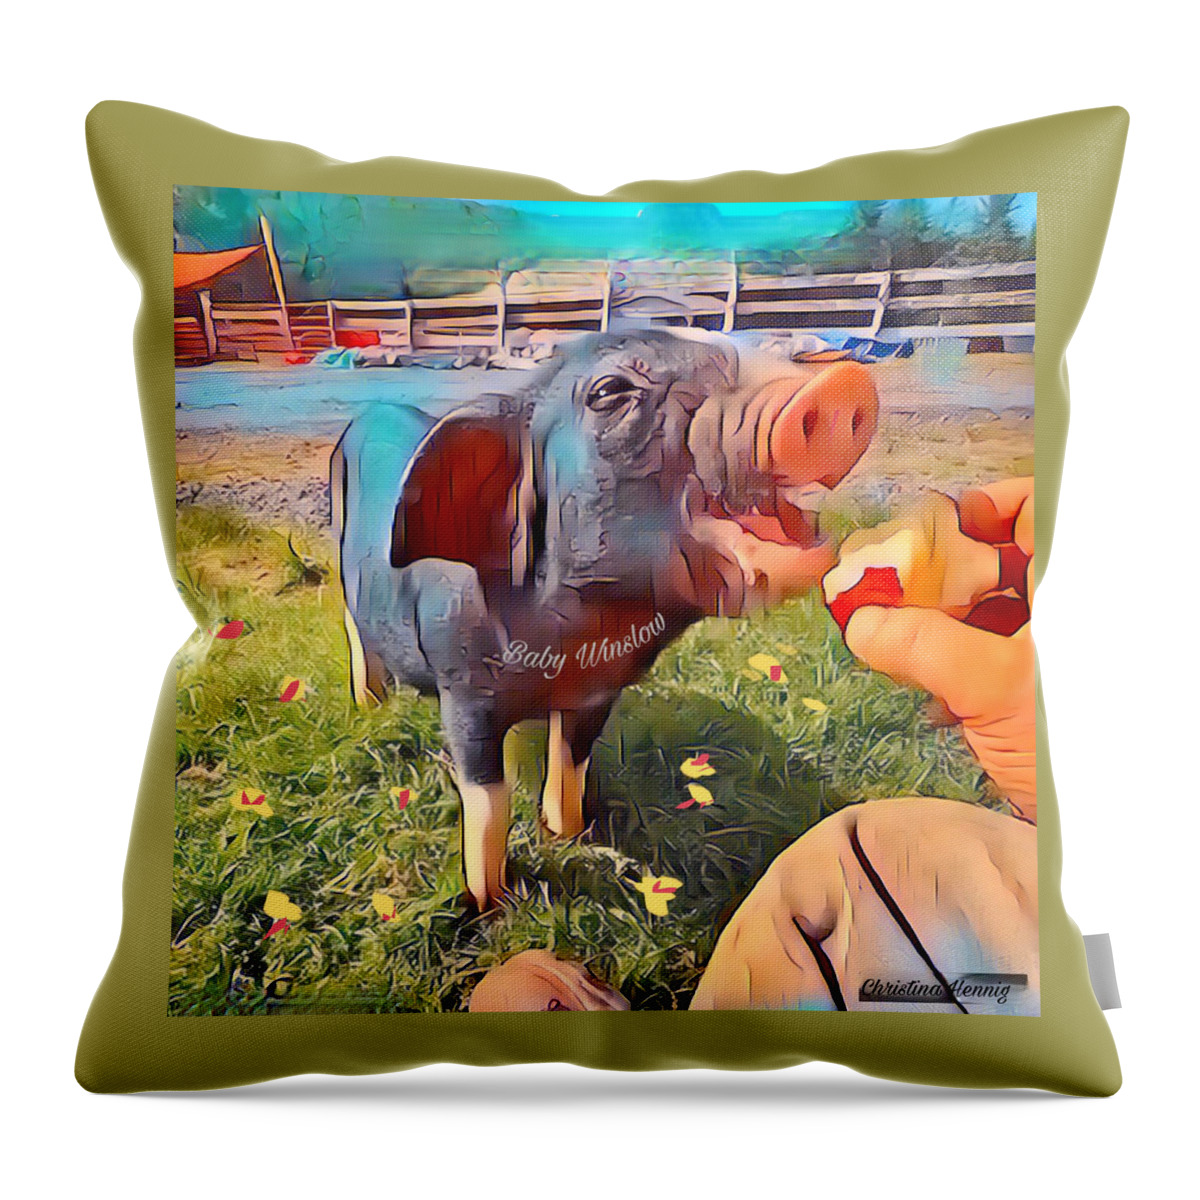 Pig Painting Throw Pillow featuring the digital art Baby Winslow by Christina Hennig